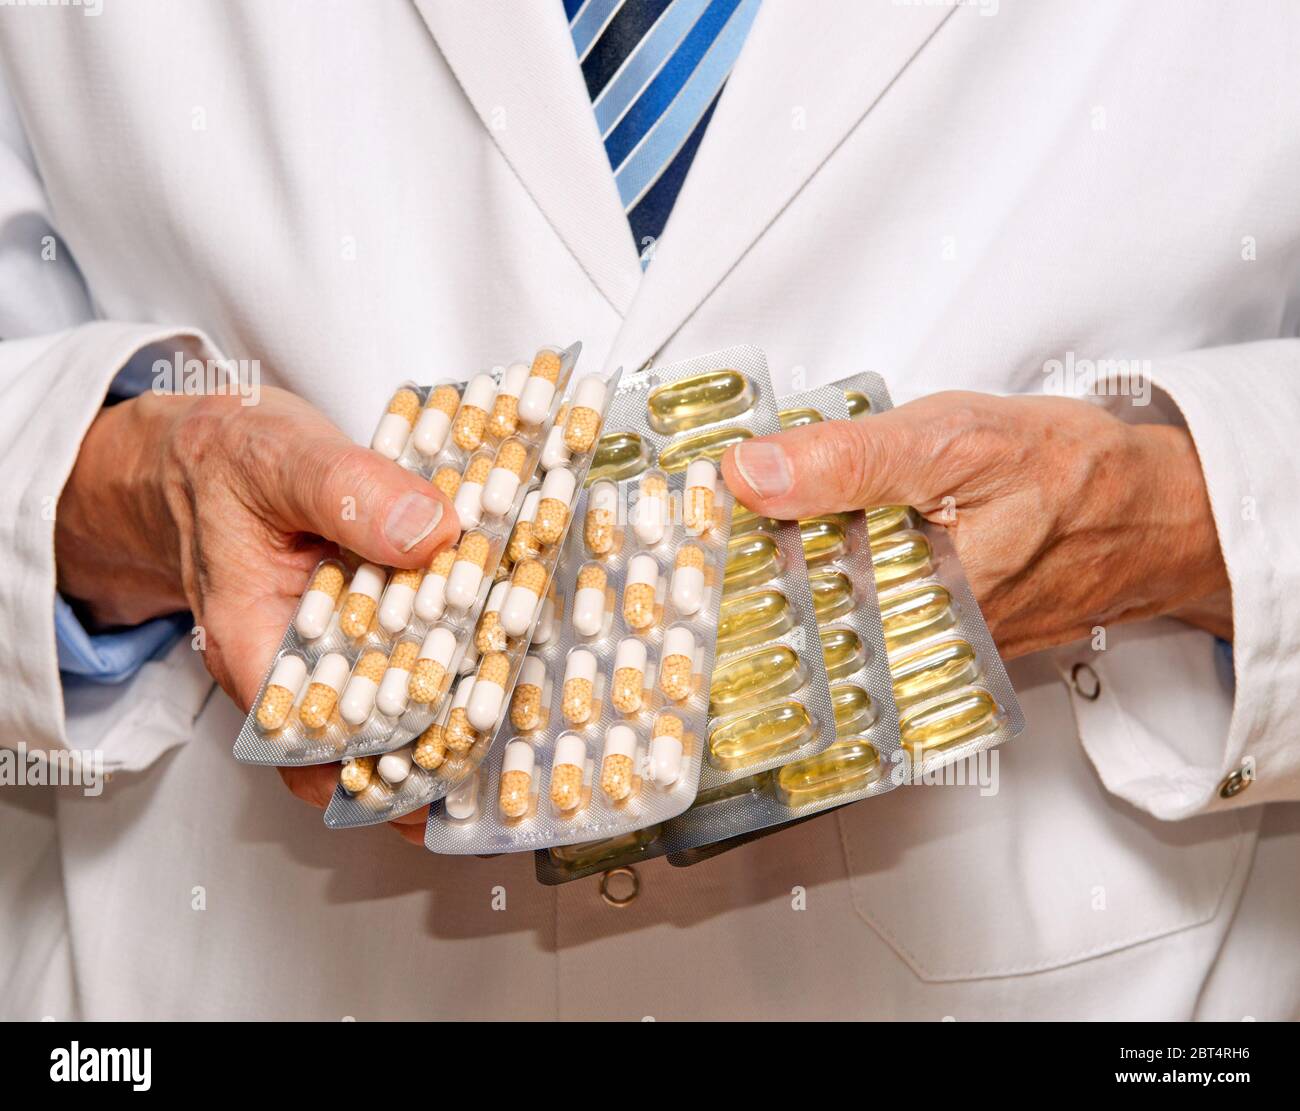 doctor, physician, medic, medical practicioner, drugs, means, agent, medicine, Stock Photo